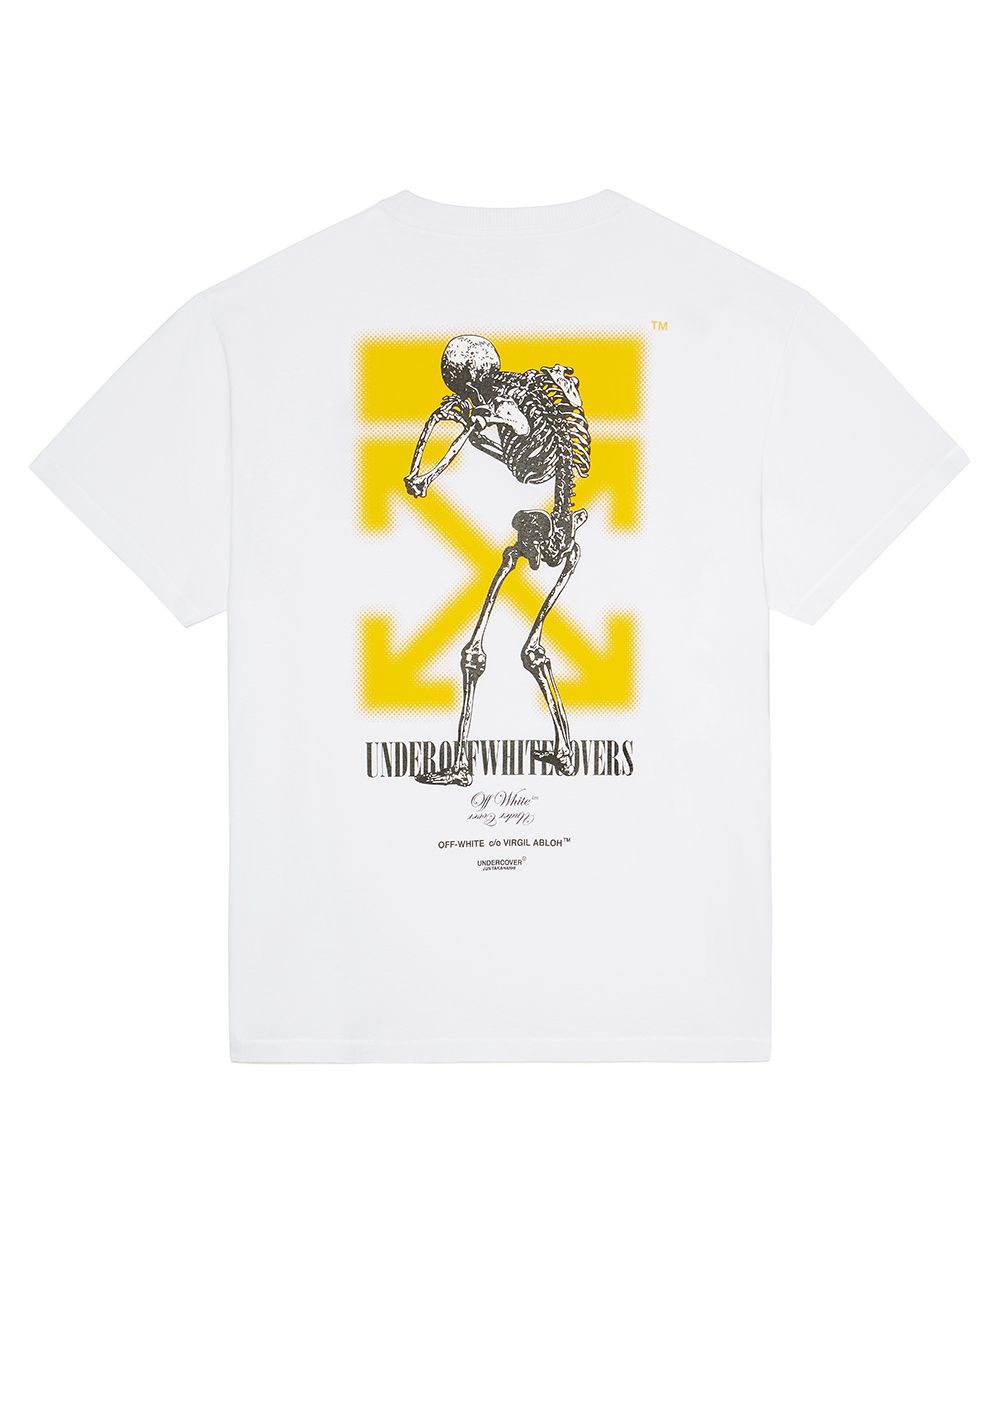 2019AW Undercover × OFF-WHITE Tシャツ